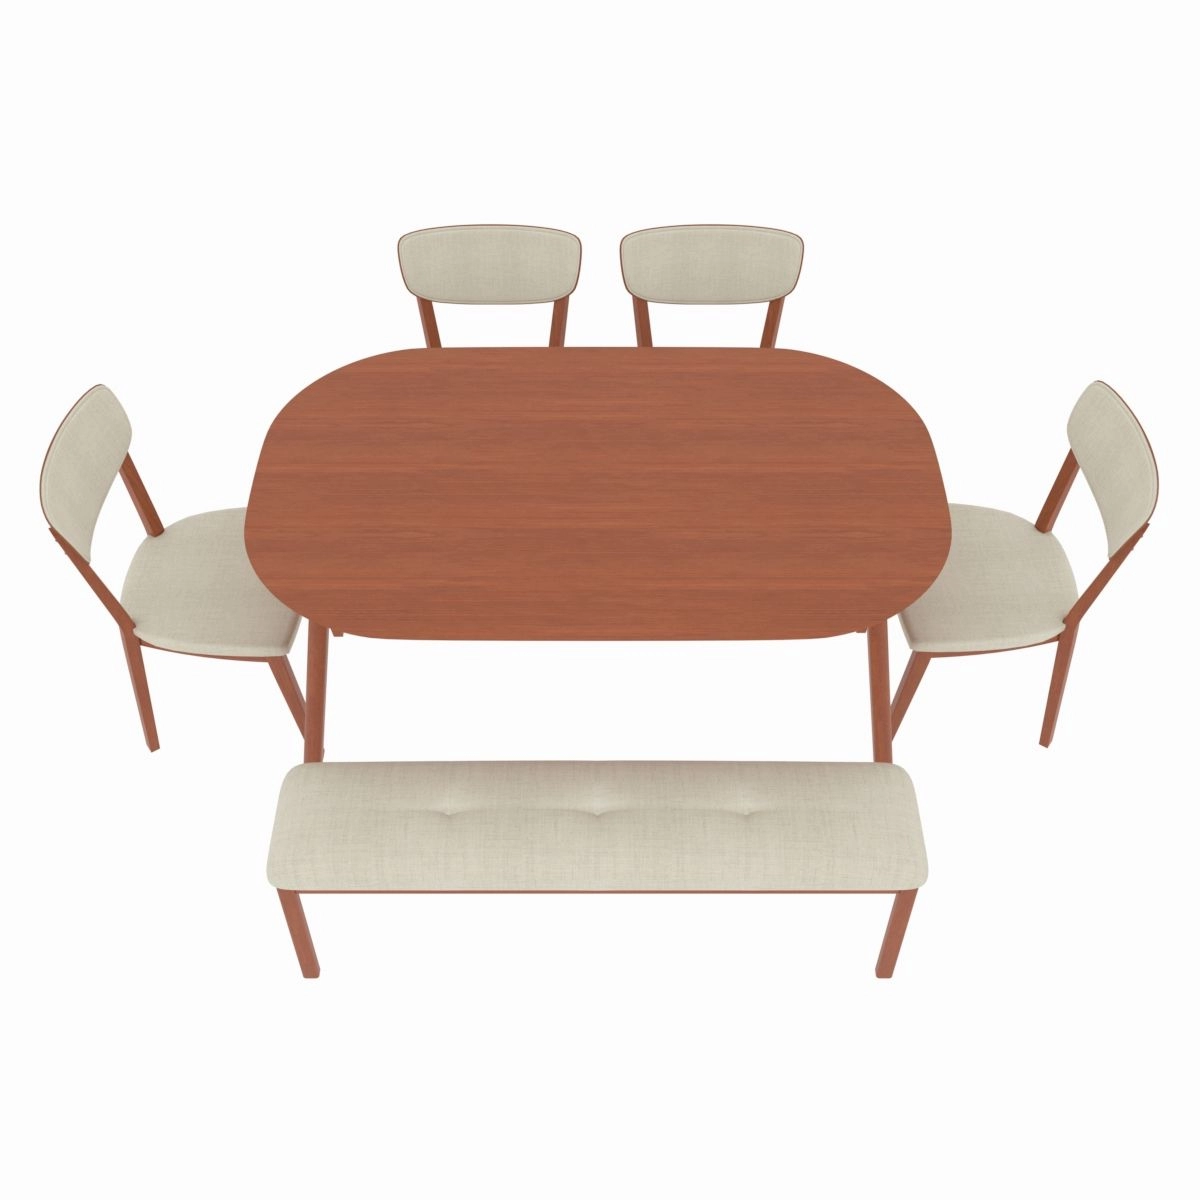 Table Chair Sets Category Image